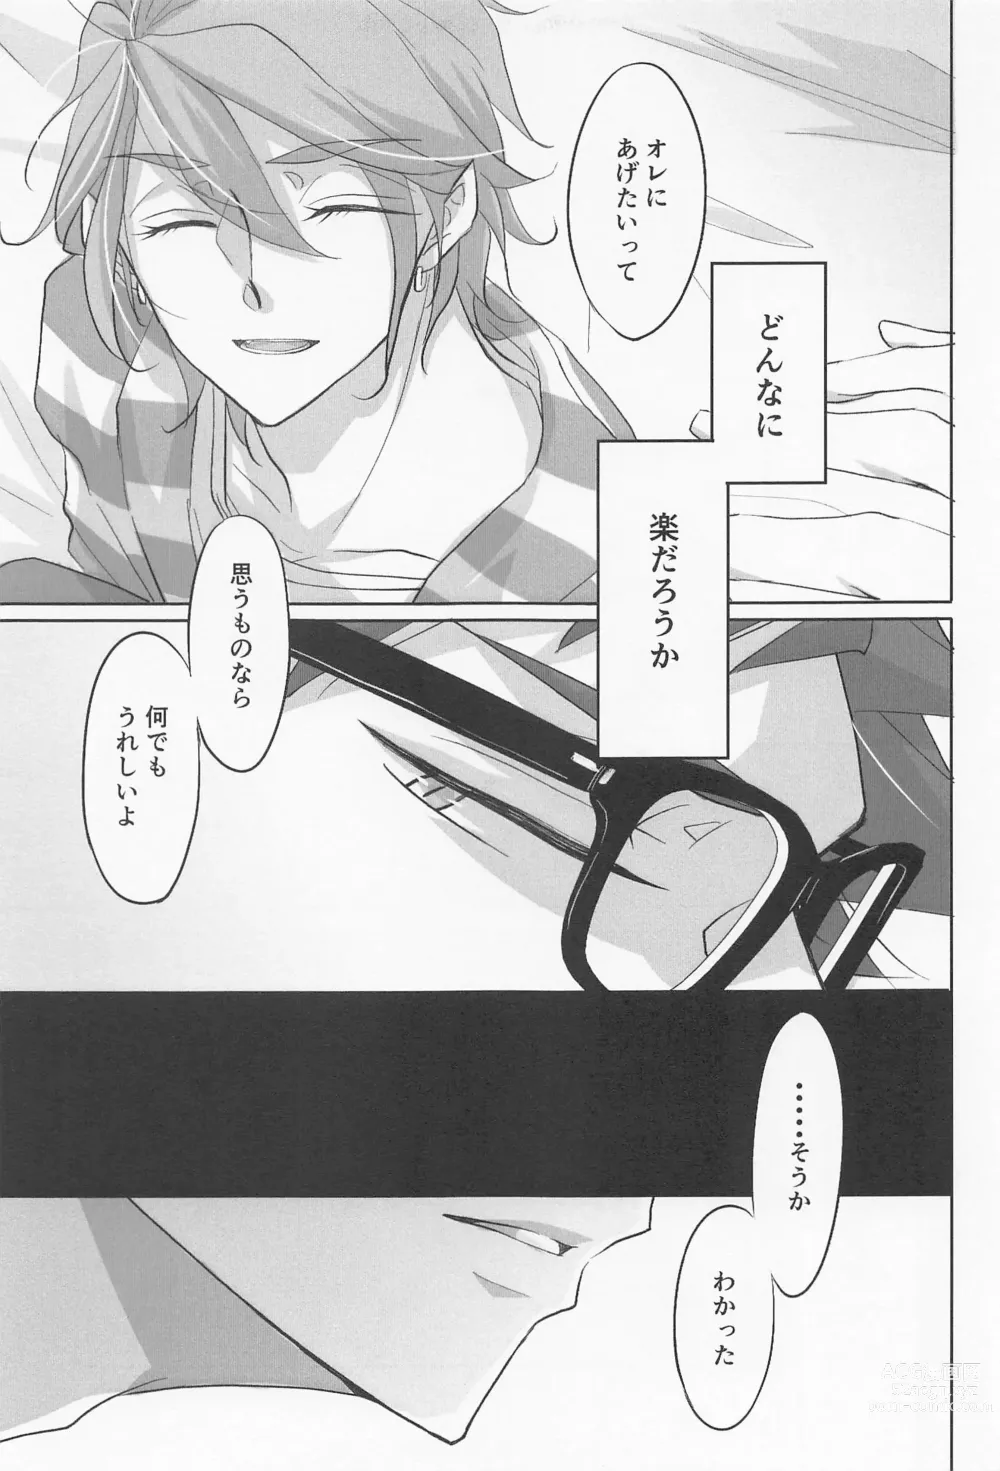 Page 16 of doujinshi My heart dedicated to you